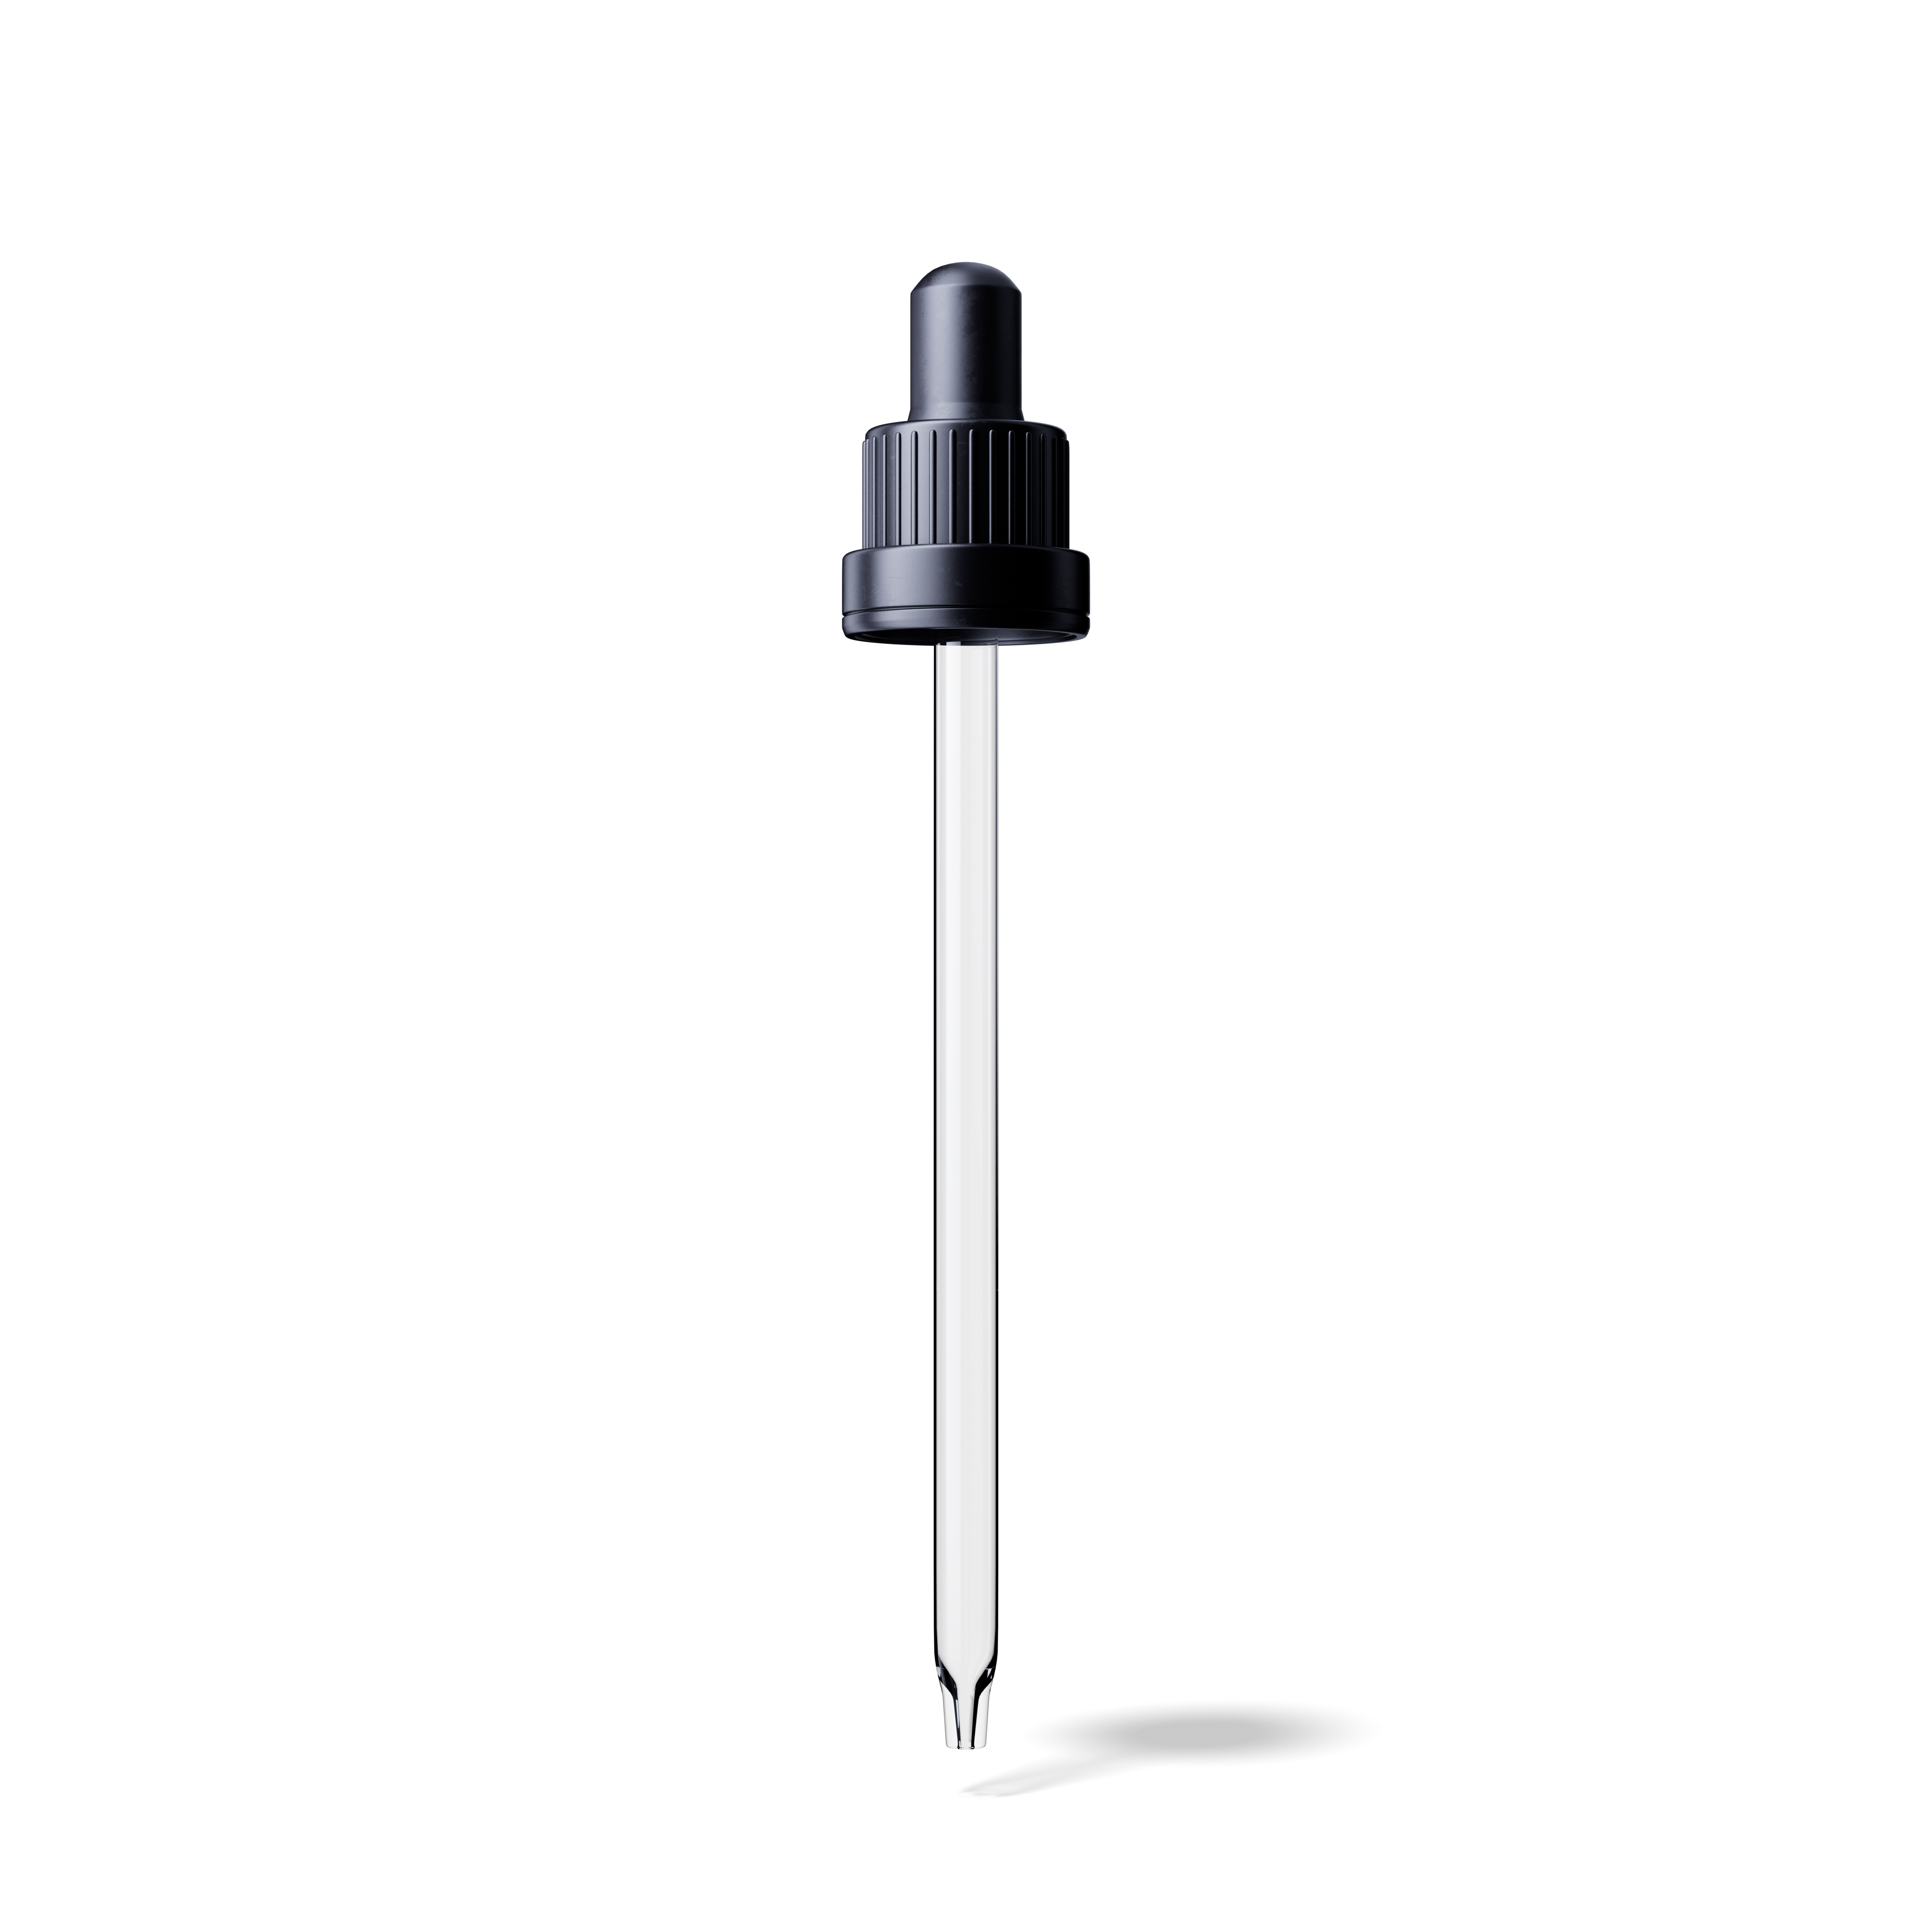 Pipette tamper evident DIN18, III, black, ribbed, bulb NBR, dose 0.7ml, conical tip (Orion 100)